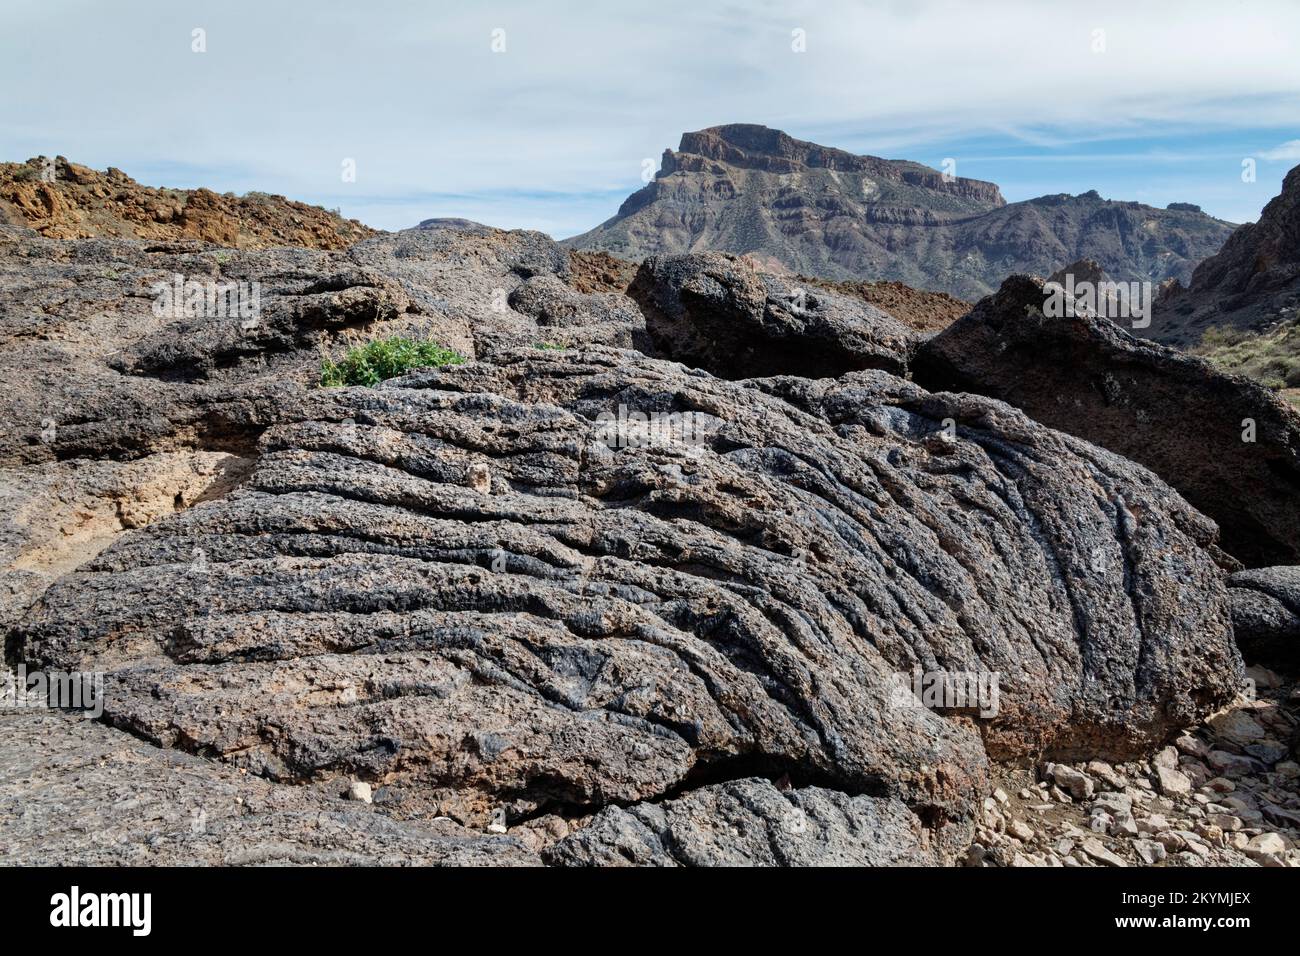 Old, cooled Pahoehoe lava with ropy texture, Teide National Park, Tenerife, Canary Islands, Spain, October. Stock Photo